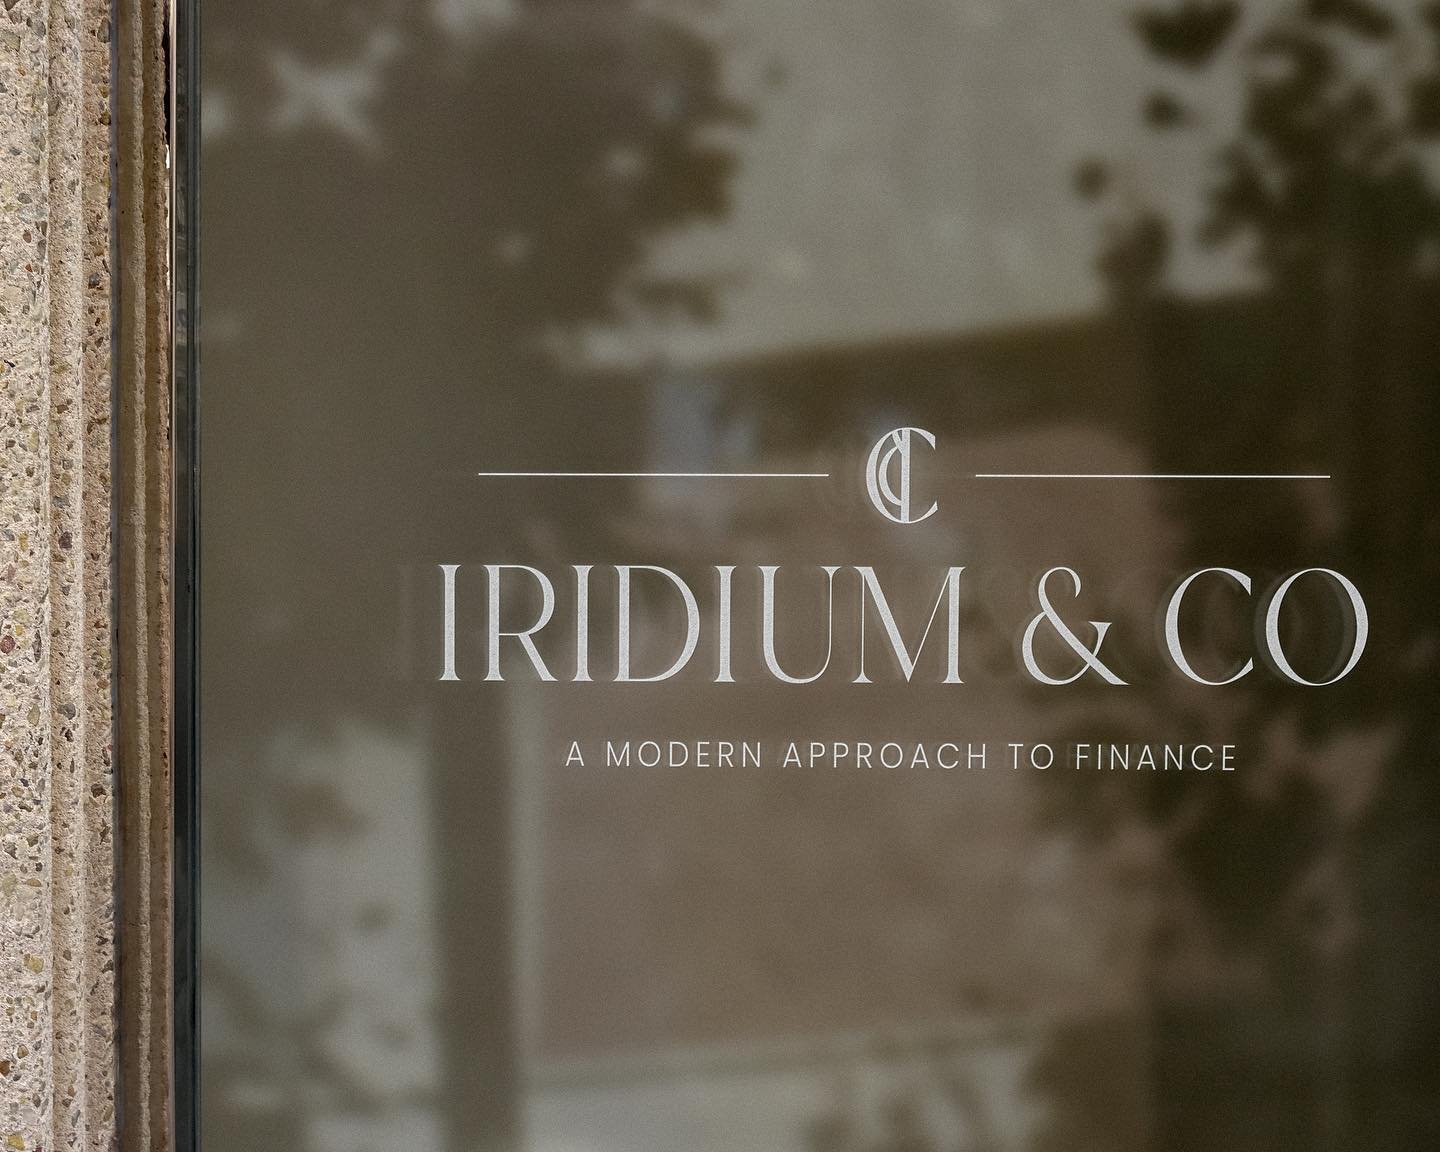 We are thrilled to unveil the new chapter in our journey - Welcome to the refreshed and reimagined Iridium &amp; Co! ✨

Iridium, remain committed to empowering your financial success and guiding you towards new horizons. Our dedication to excellence 